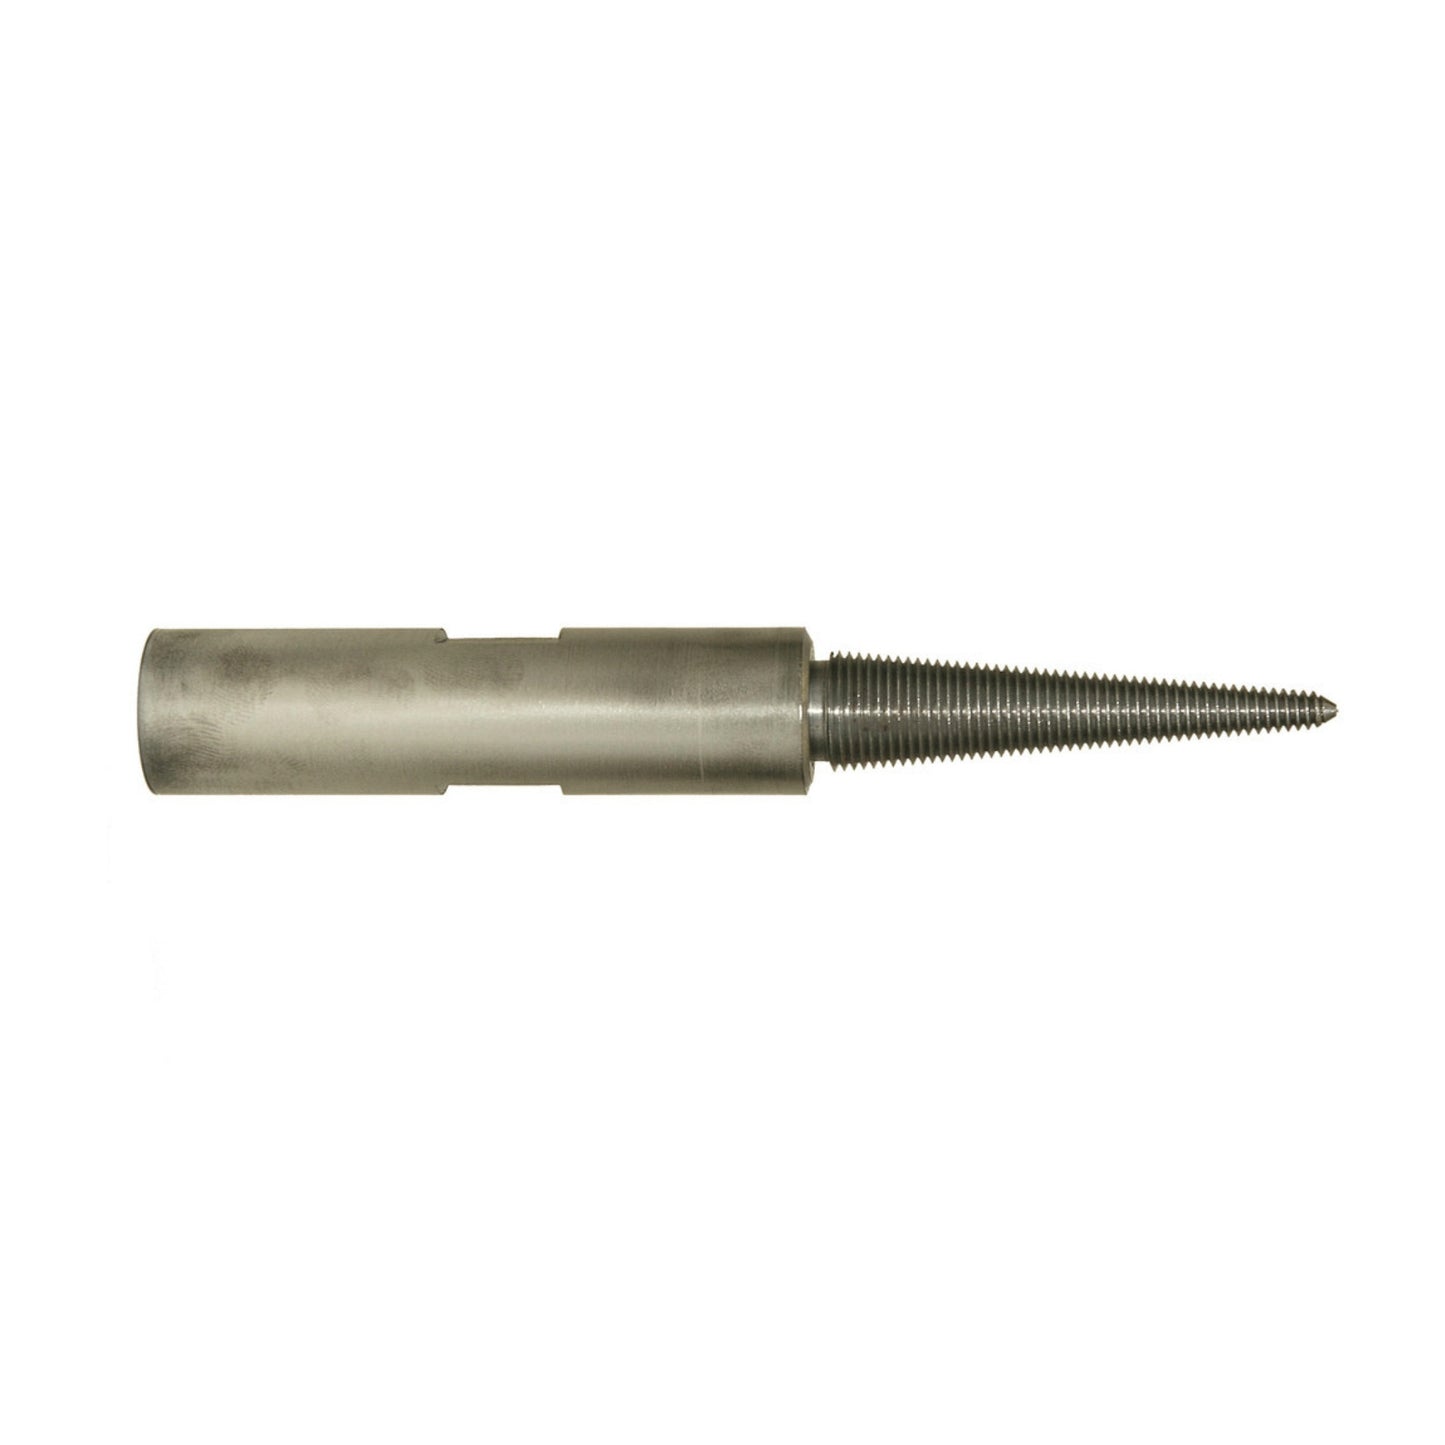 Arbe® Spindle - 5/8" Tapered Spindle with Thread